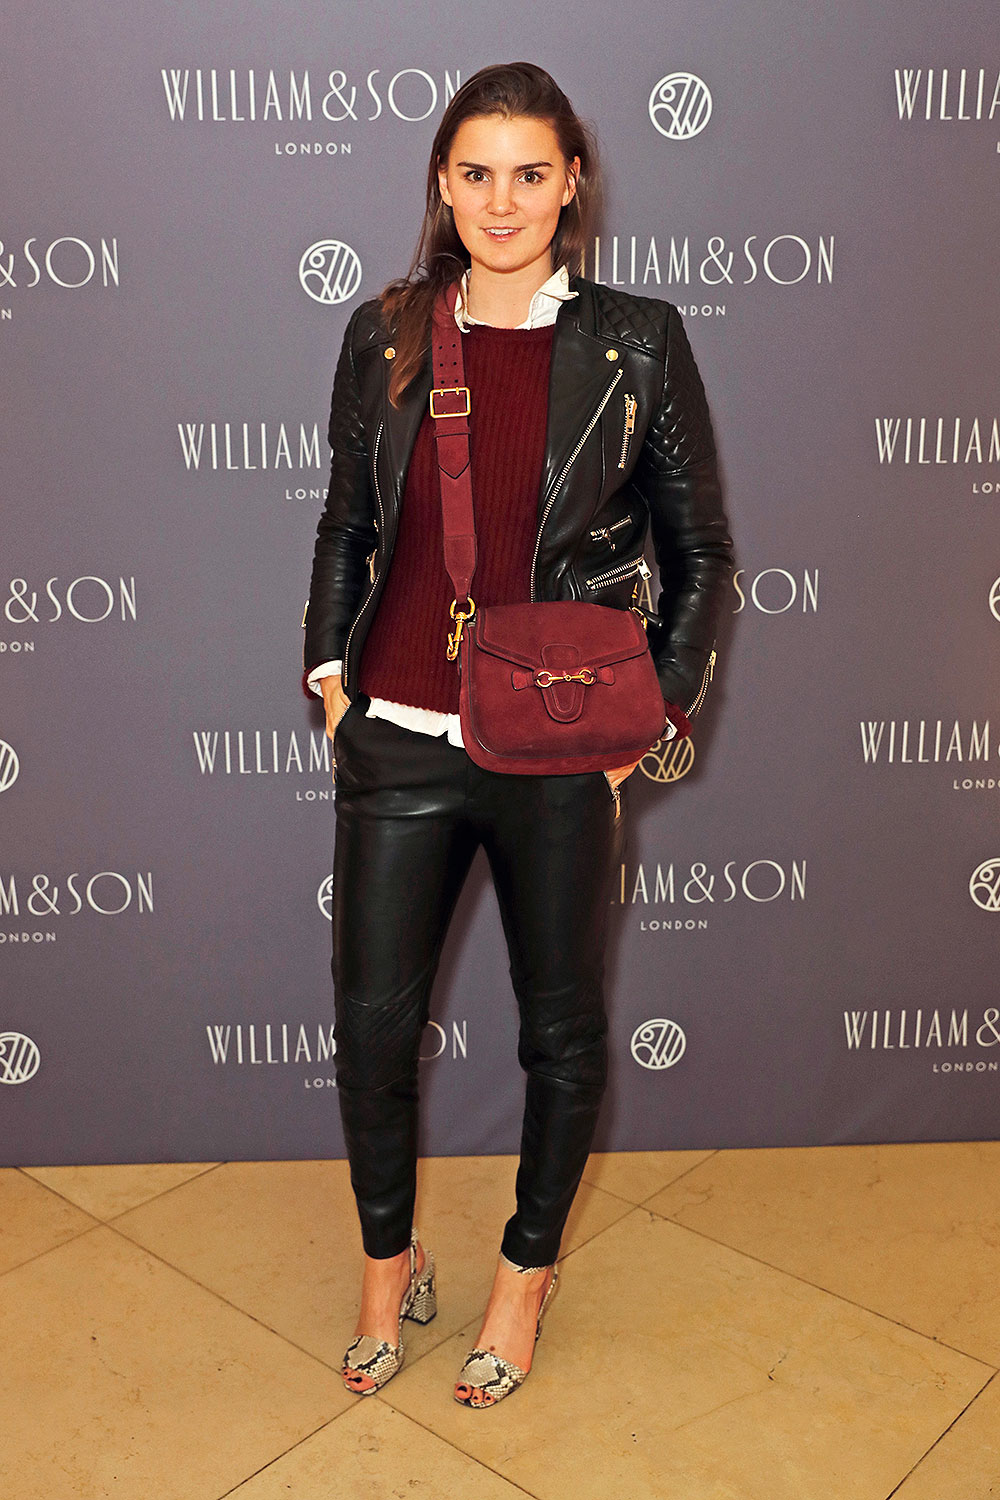 Charlotte Rey attends the William & Son Gala cocktail party